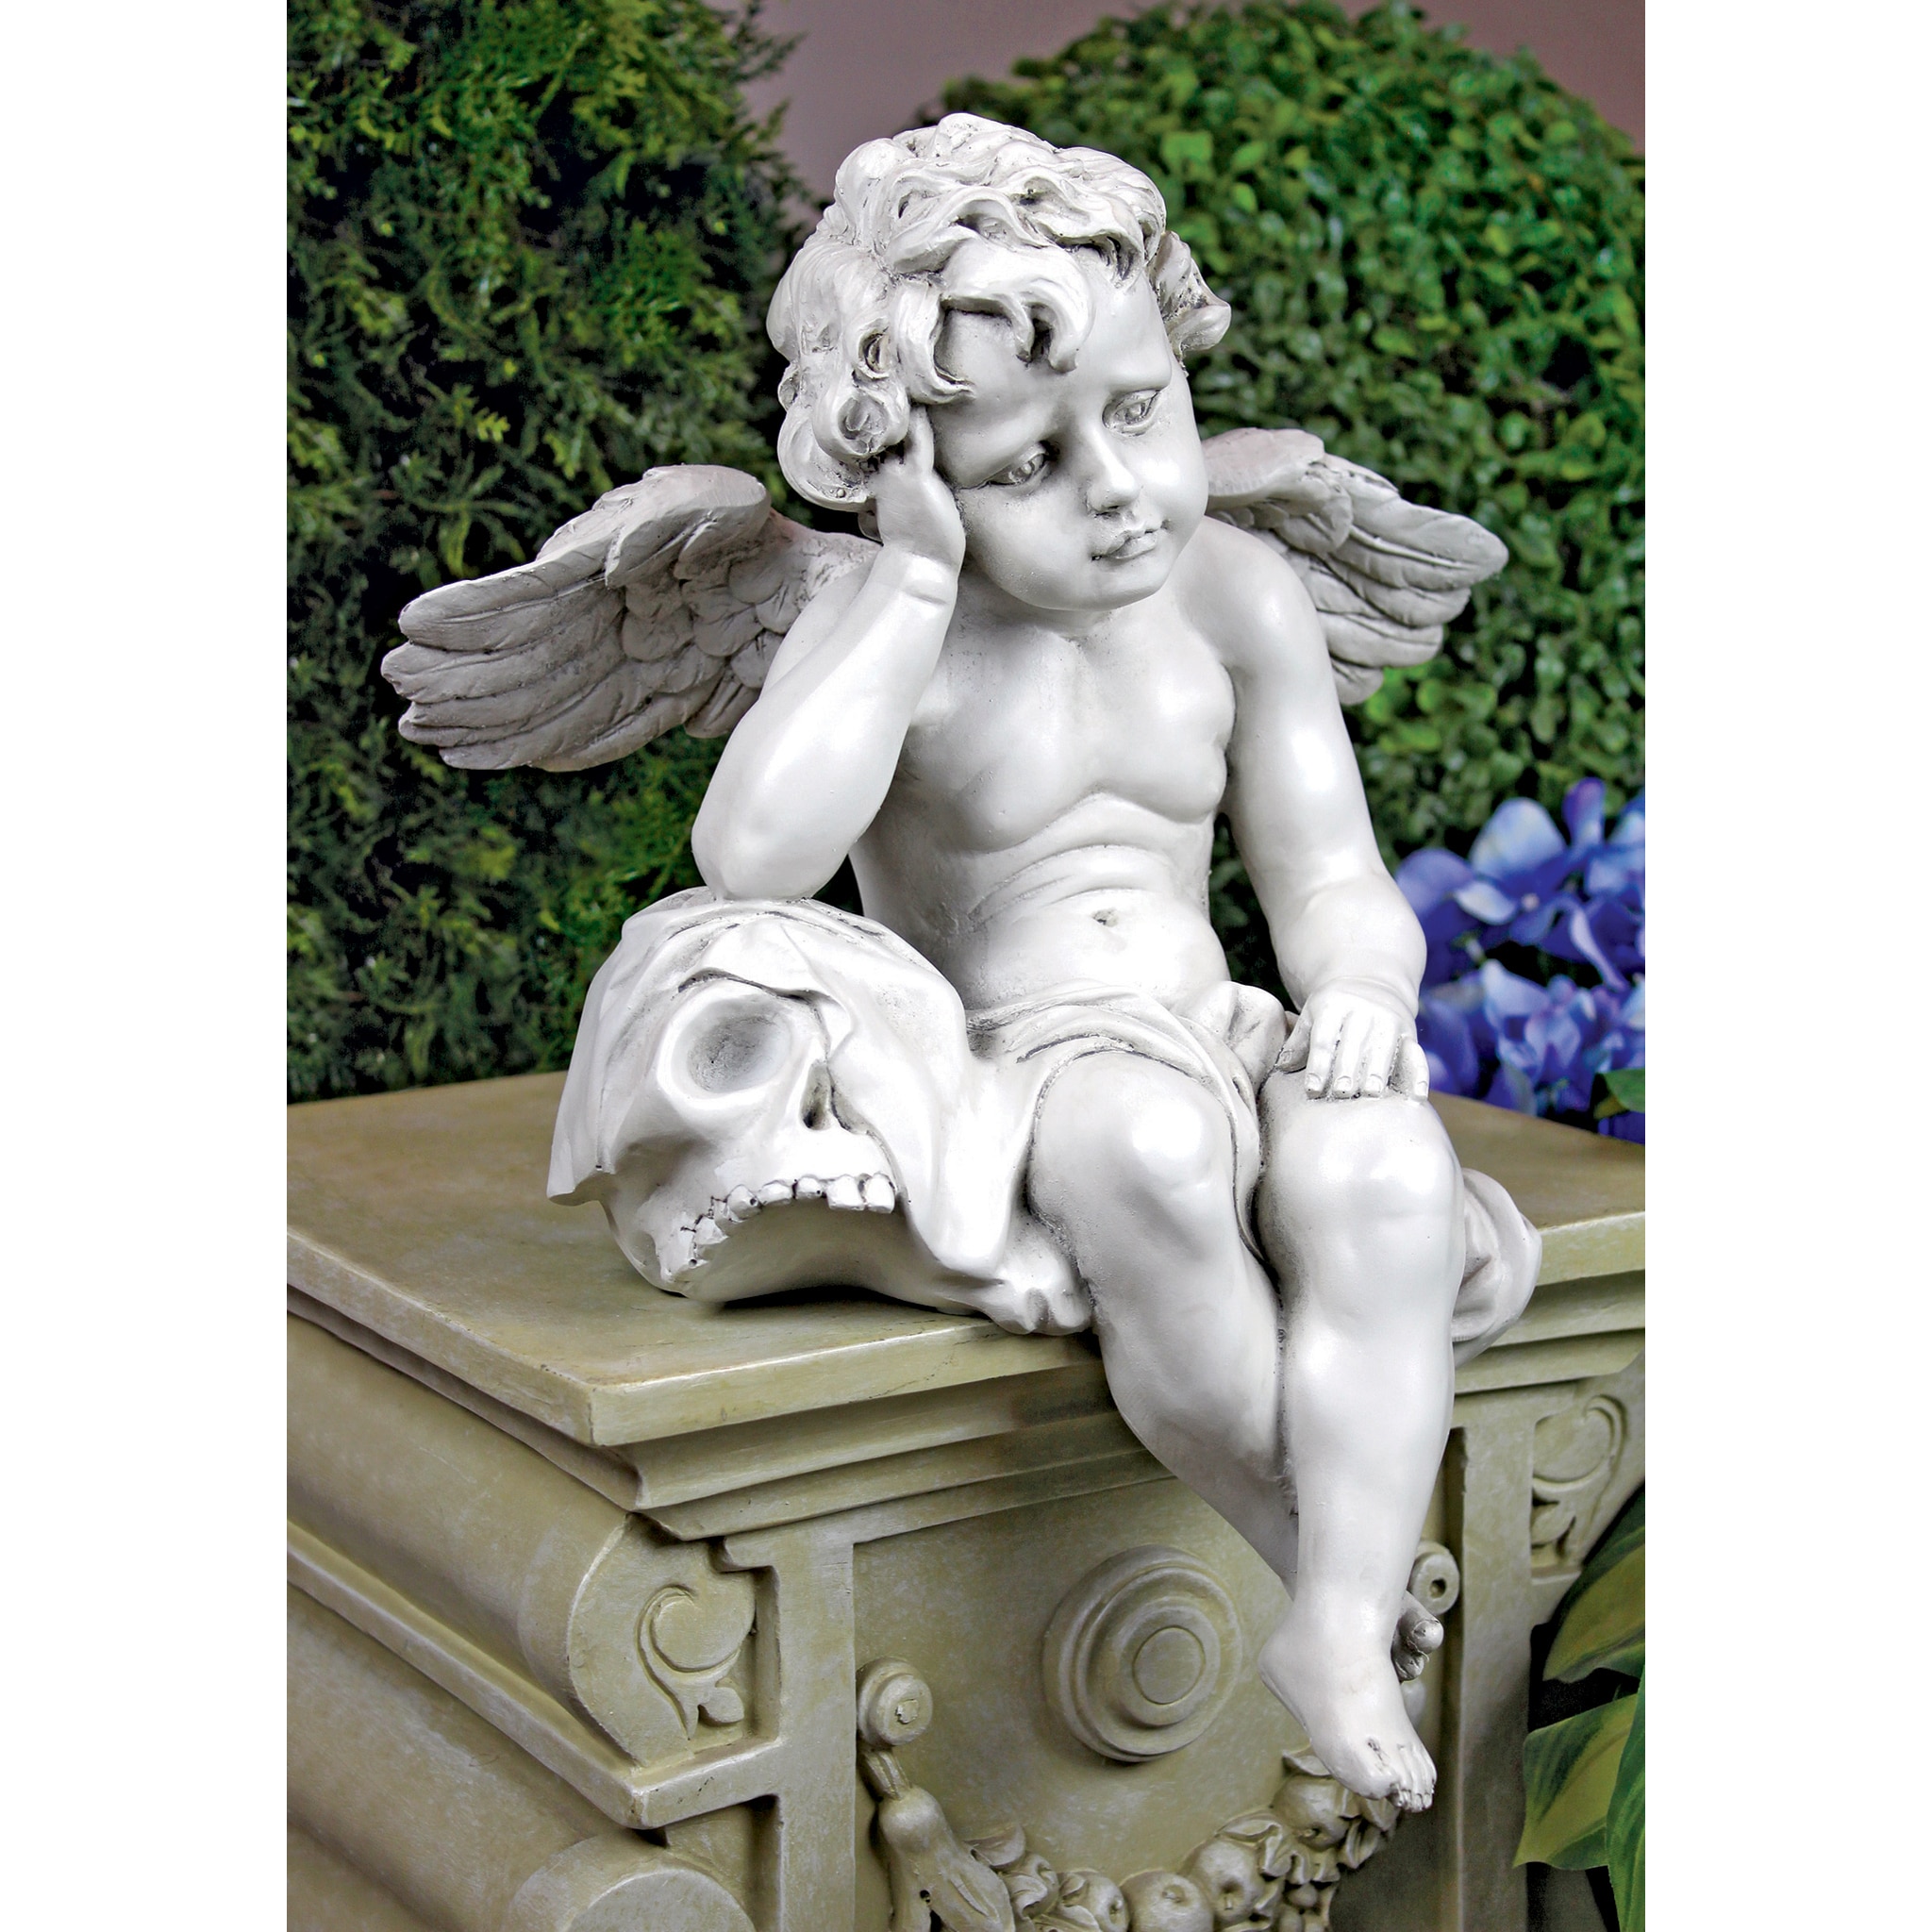 Design Toscano 13-in H x 8.5-in W Off-white Angels and Cherubs